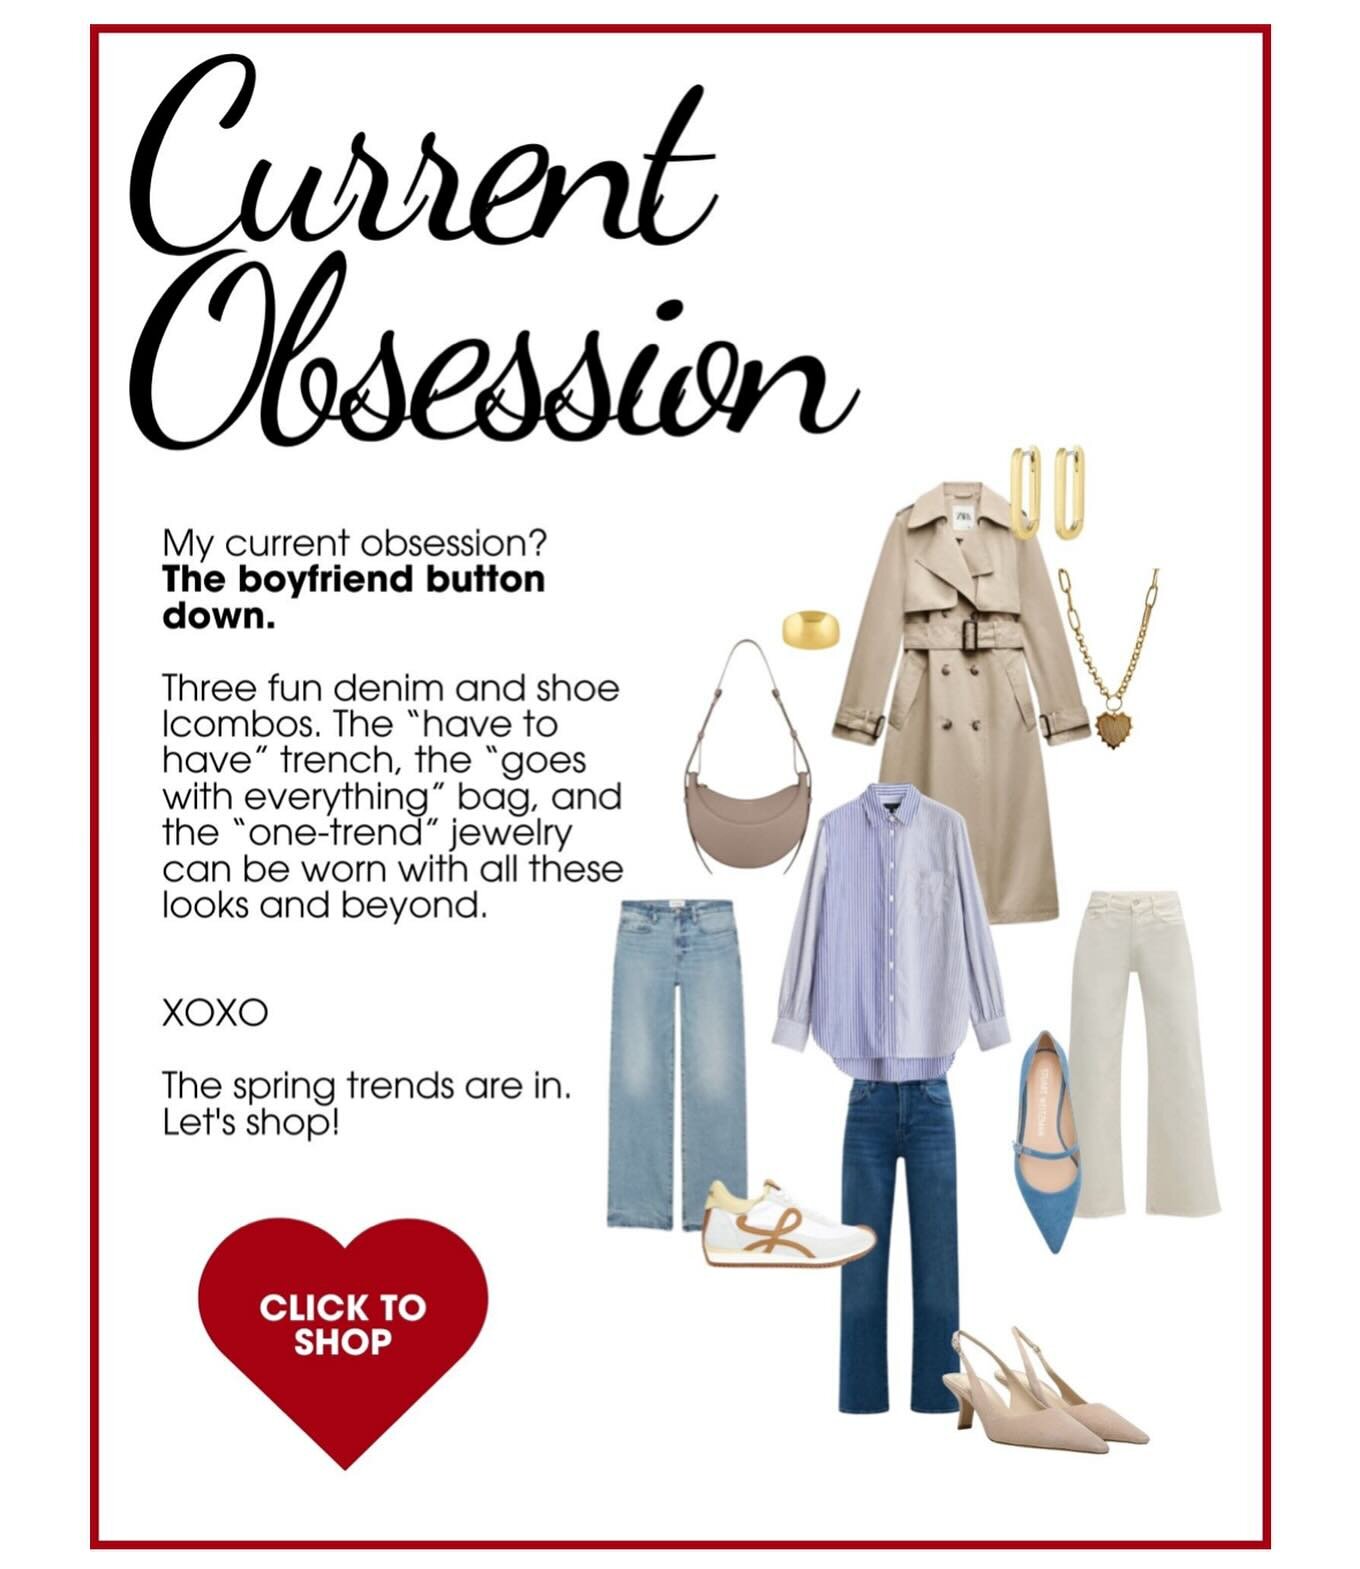 Check your inboxes! Current Obsession newsletter out today! 💌 Message me if you would like to be added to the email list &amp; visit the link in bio to shop. 👖🧥👟